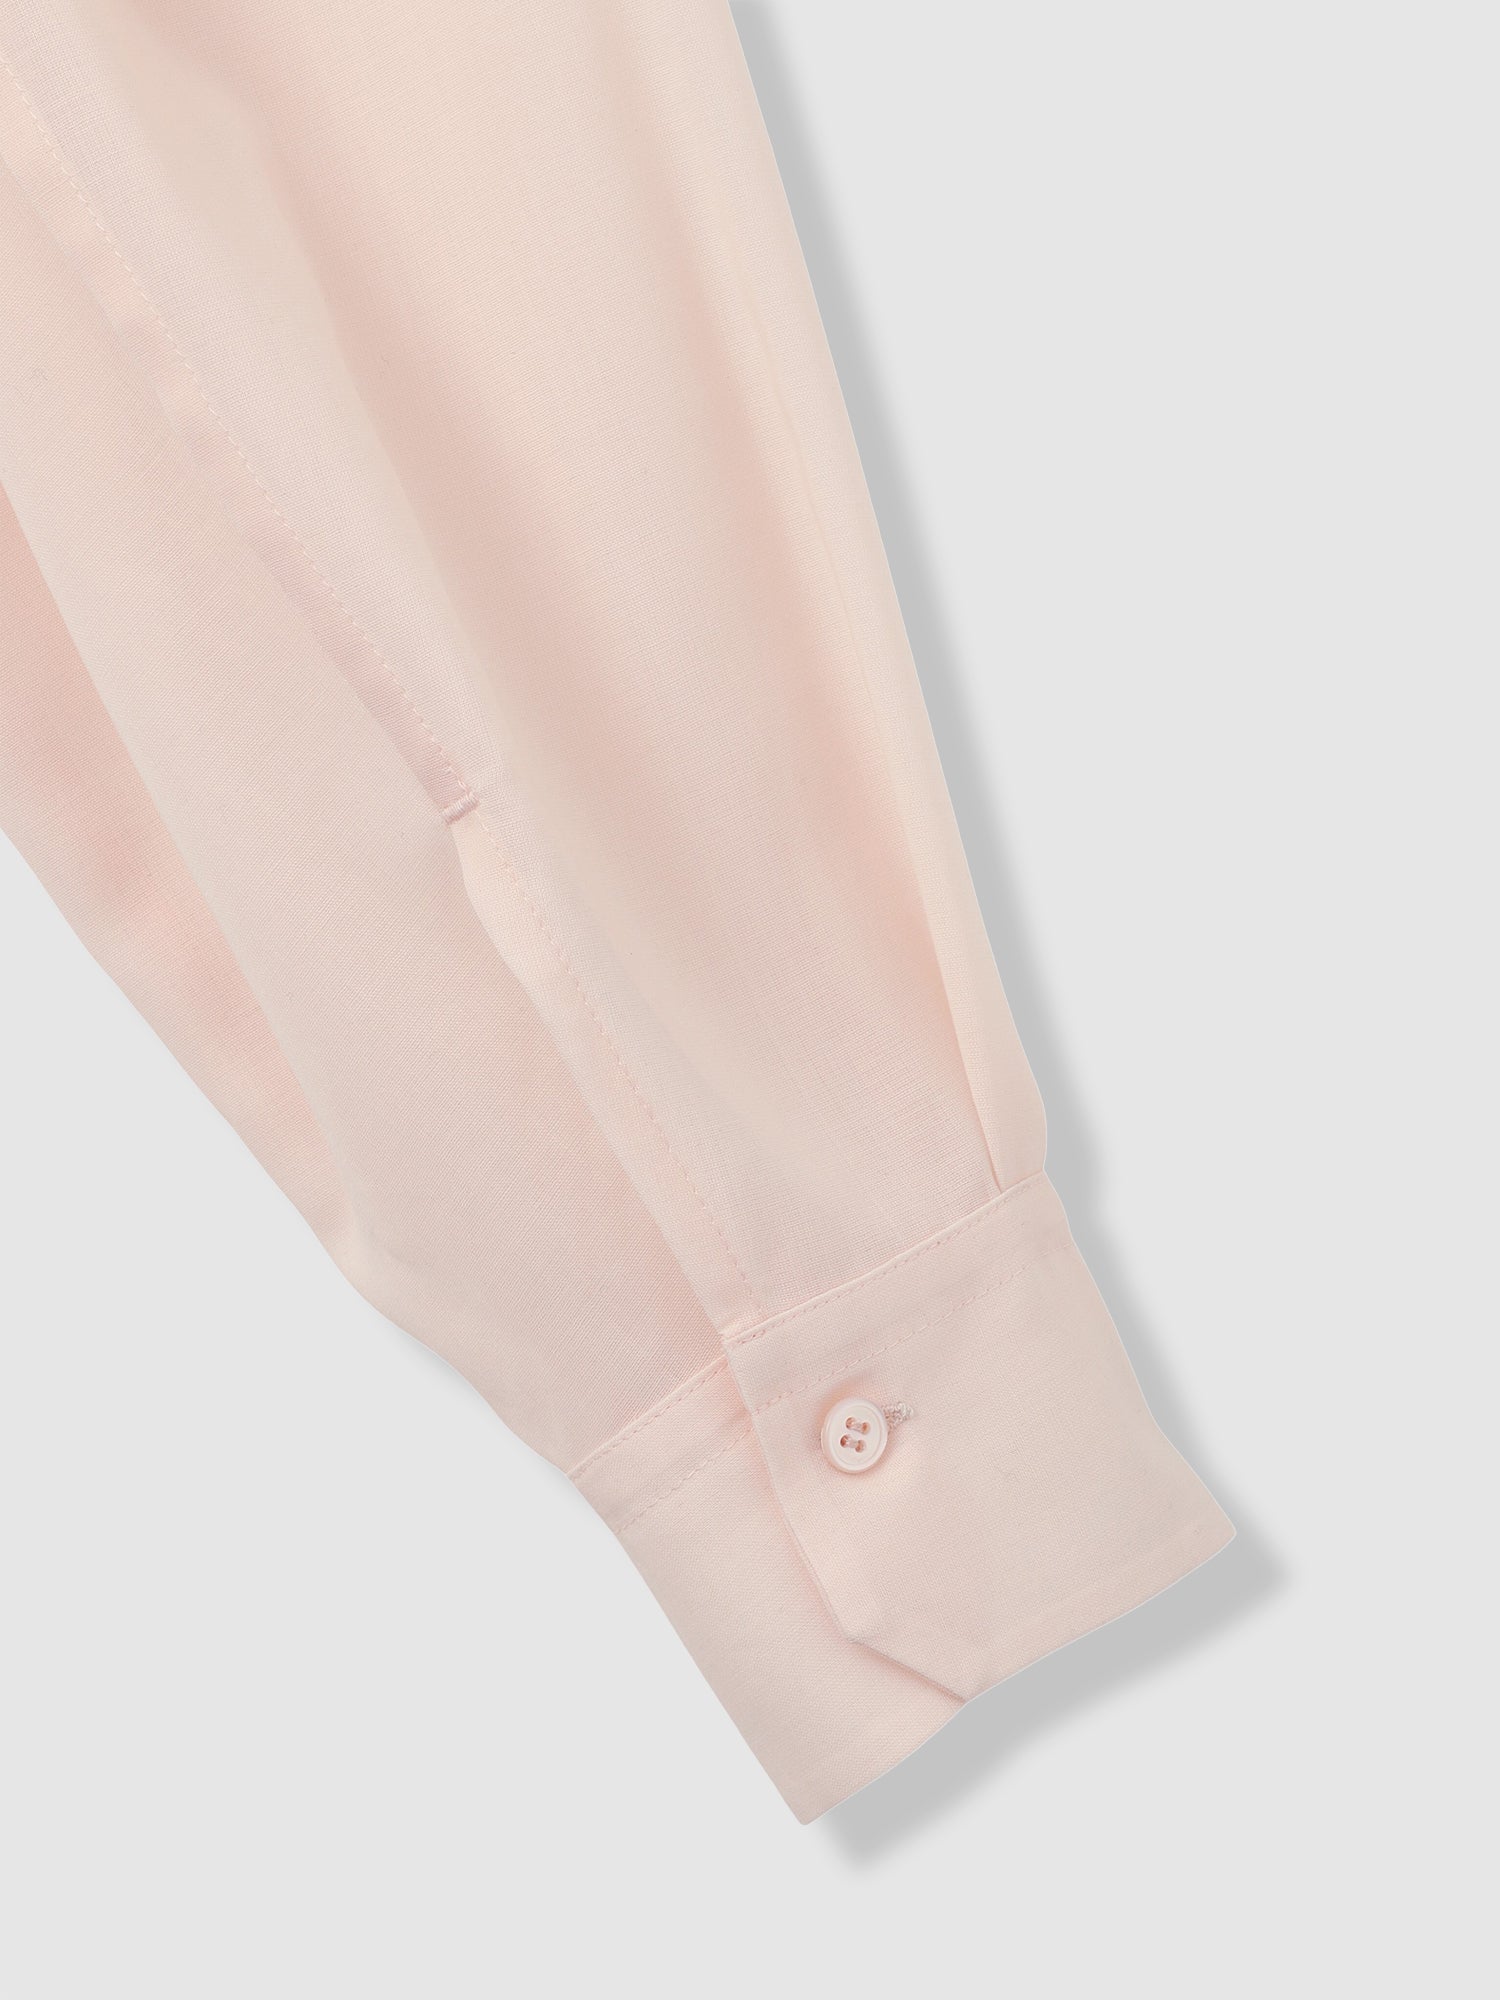 Voile Sheer Shirts<BR>新着アイテム|春夏シーズン